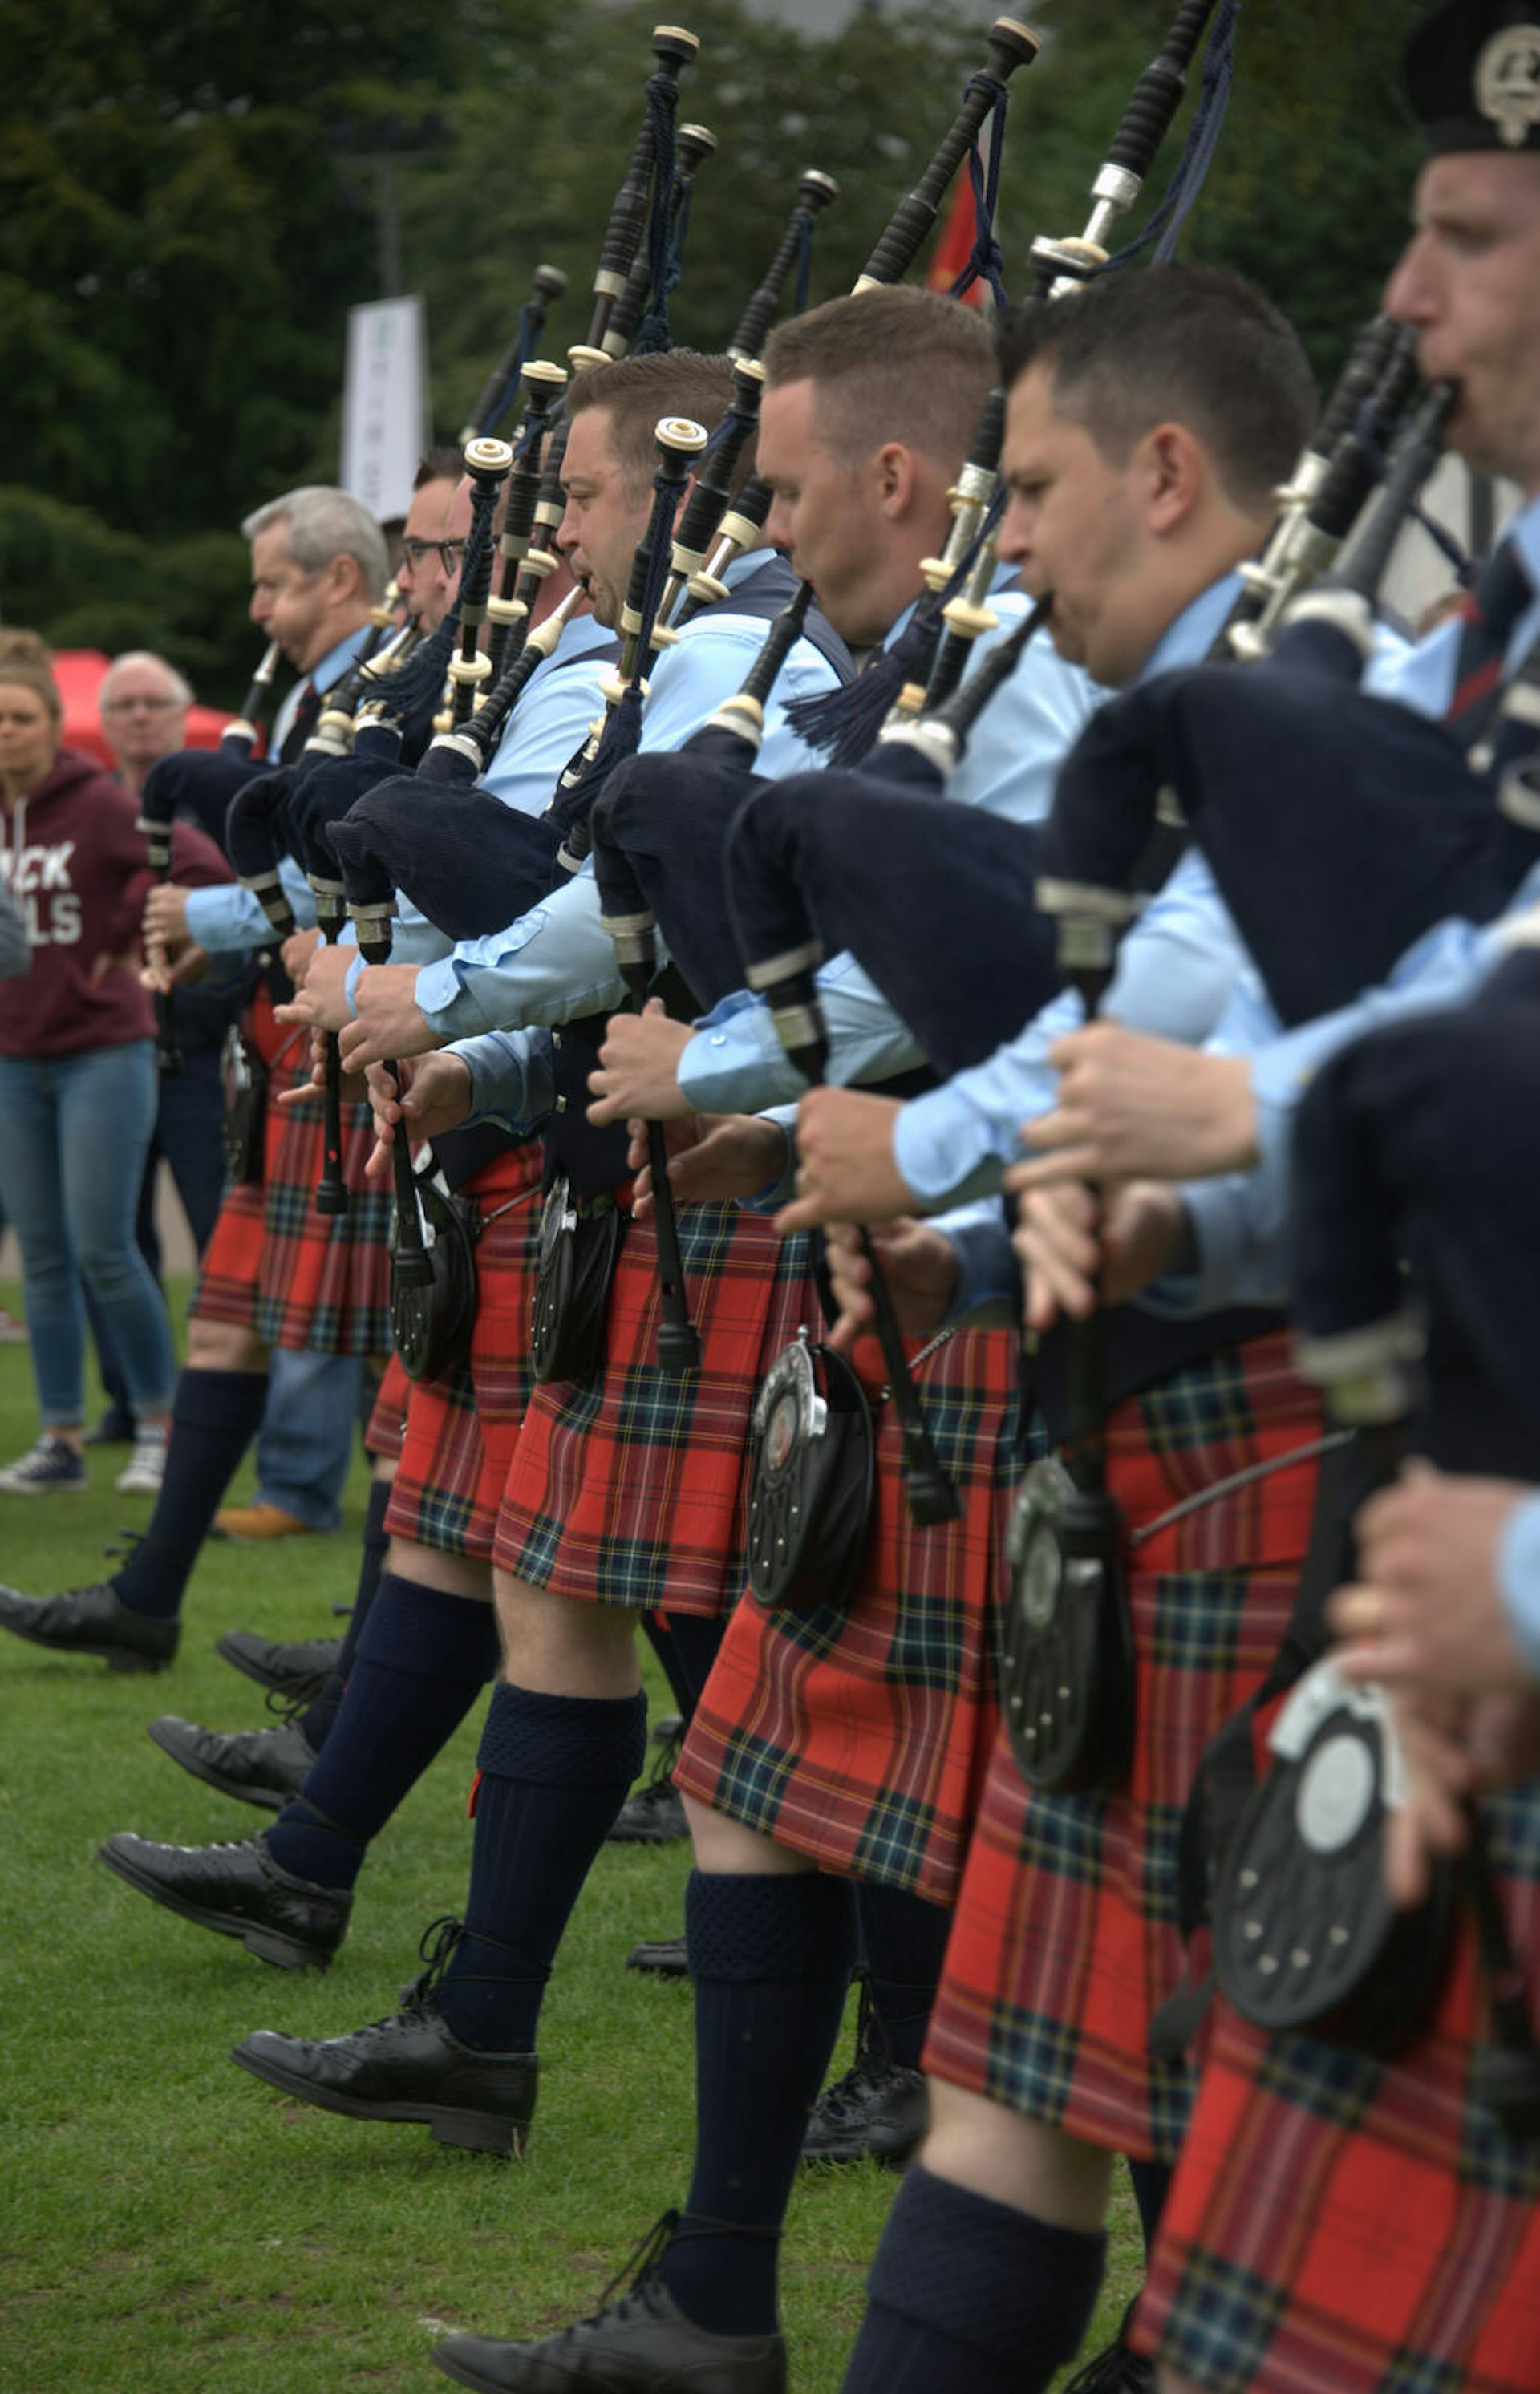 A line of pipers performs at the World Pipe Band Championships